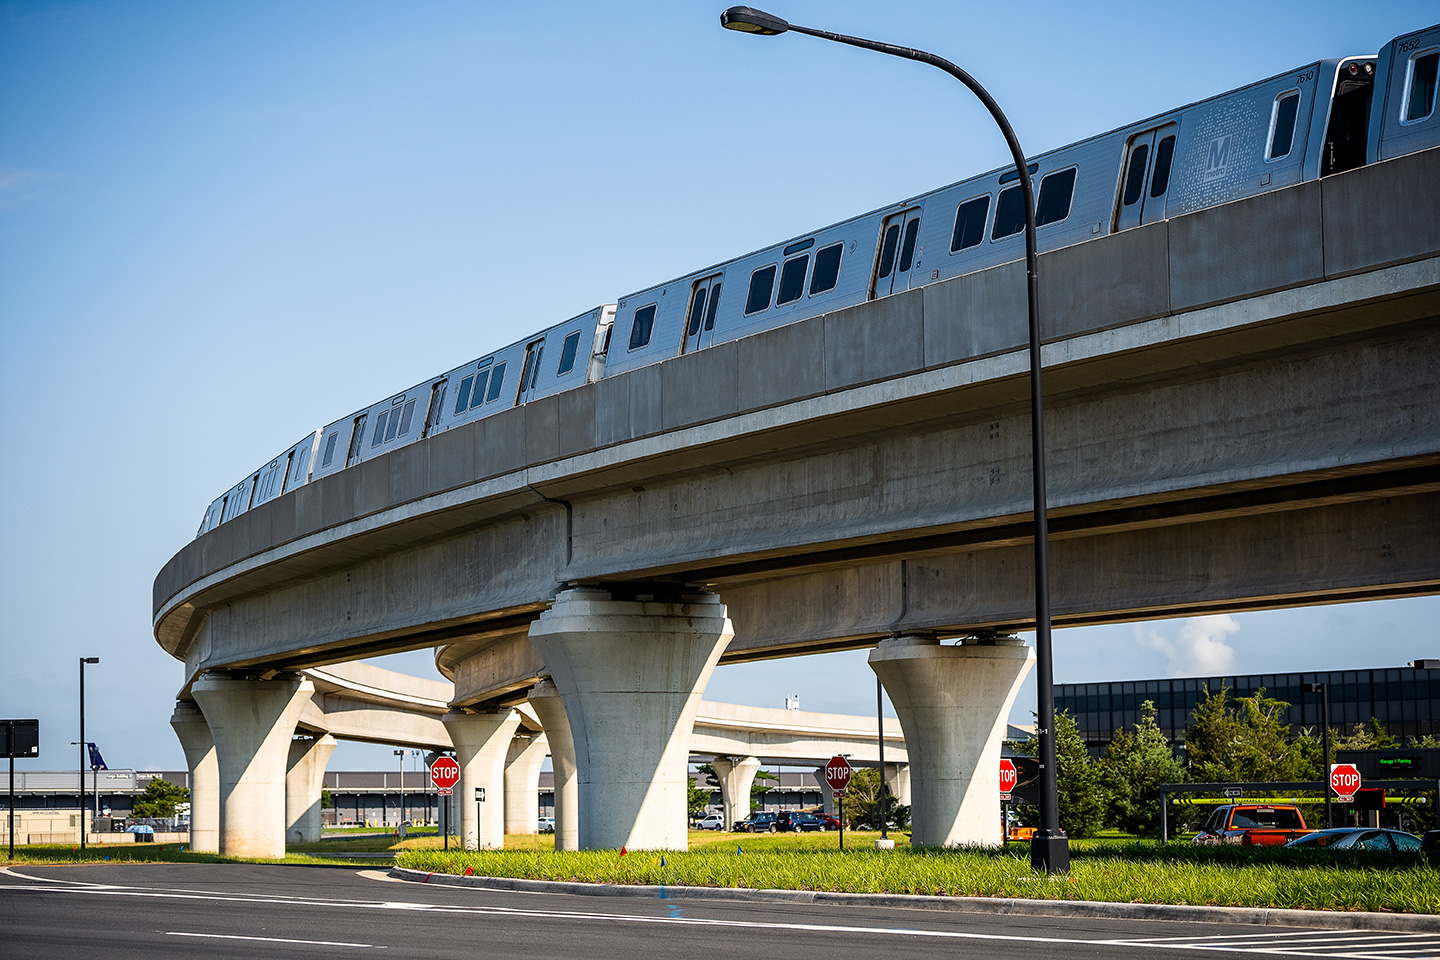 The $1.18-billion second phase of the Dulles Corridor Metrorail, also known as the Silver Line, is an 11.4-mile extension by the design-build team of Capital Rail Constructors for the Metropolitan Washington Airports Authority.